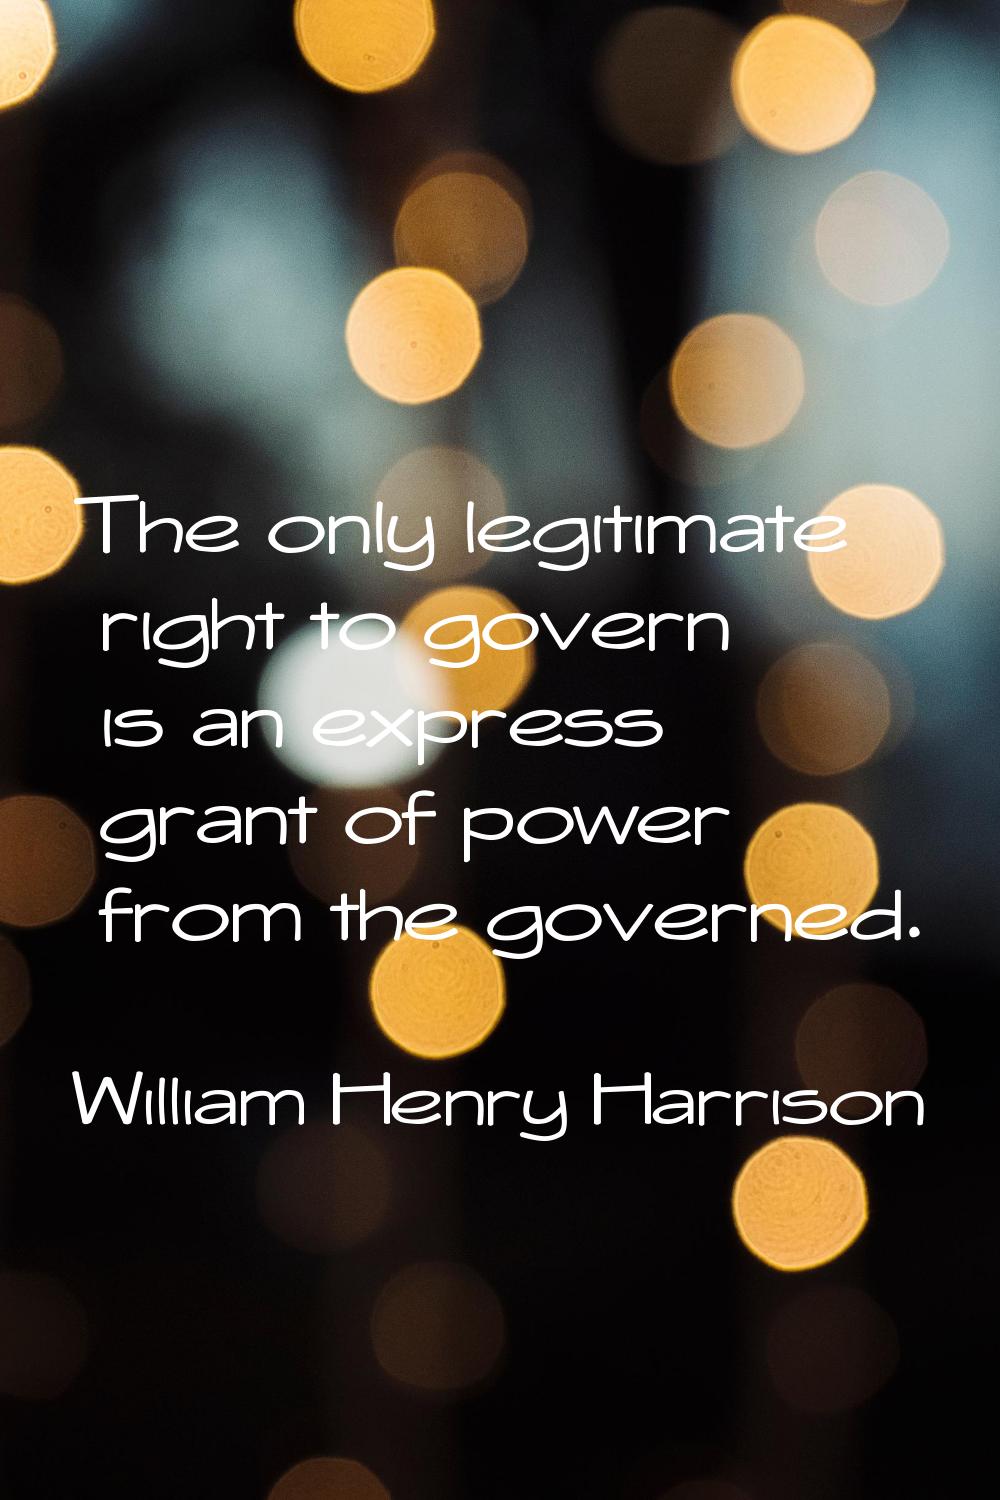 The only legitimate right to govern is an express grant of power from the governed.